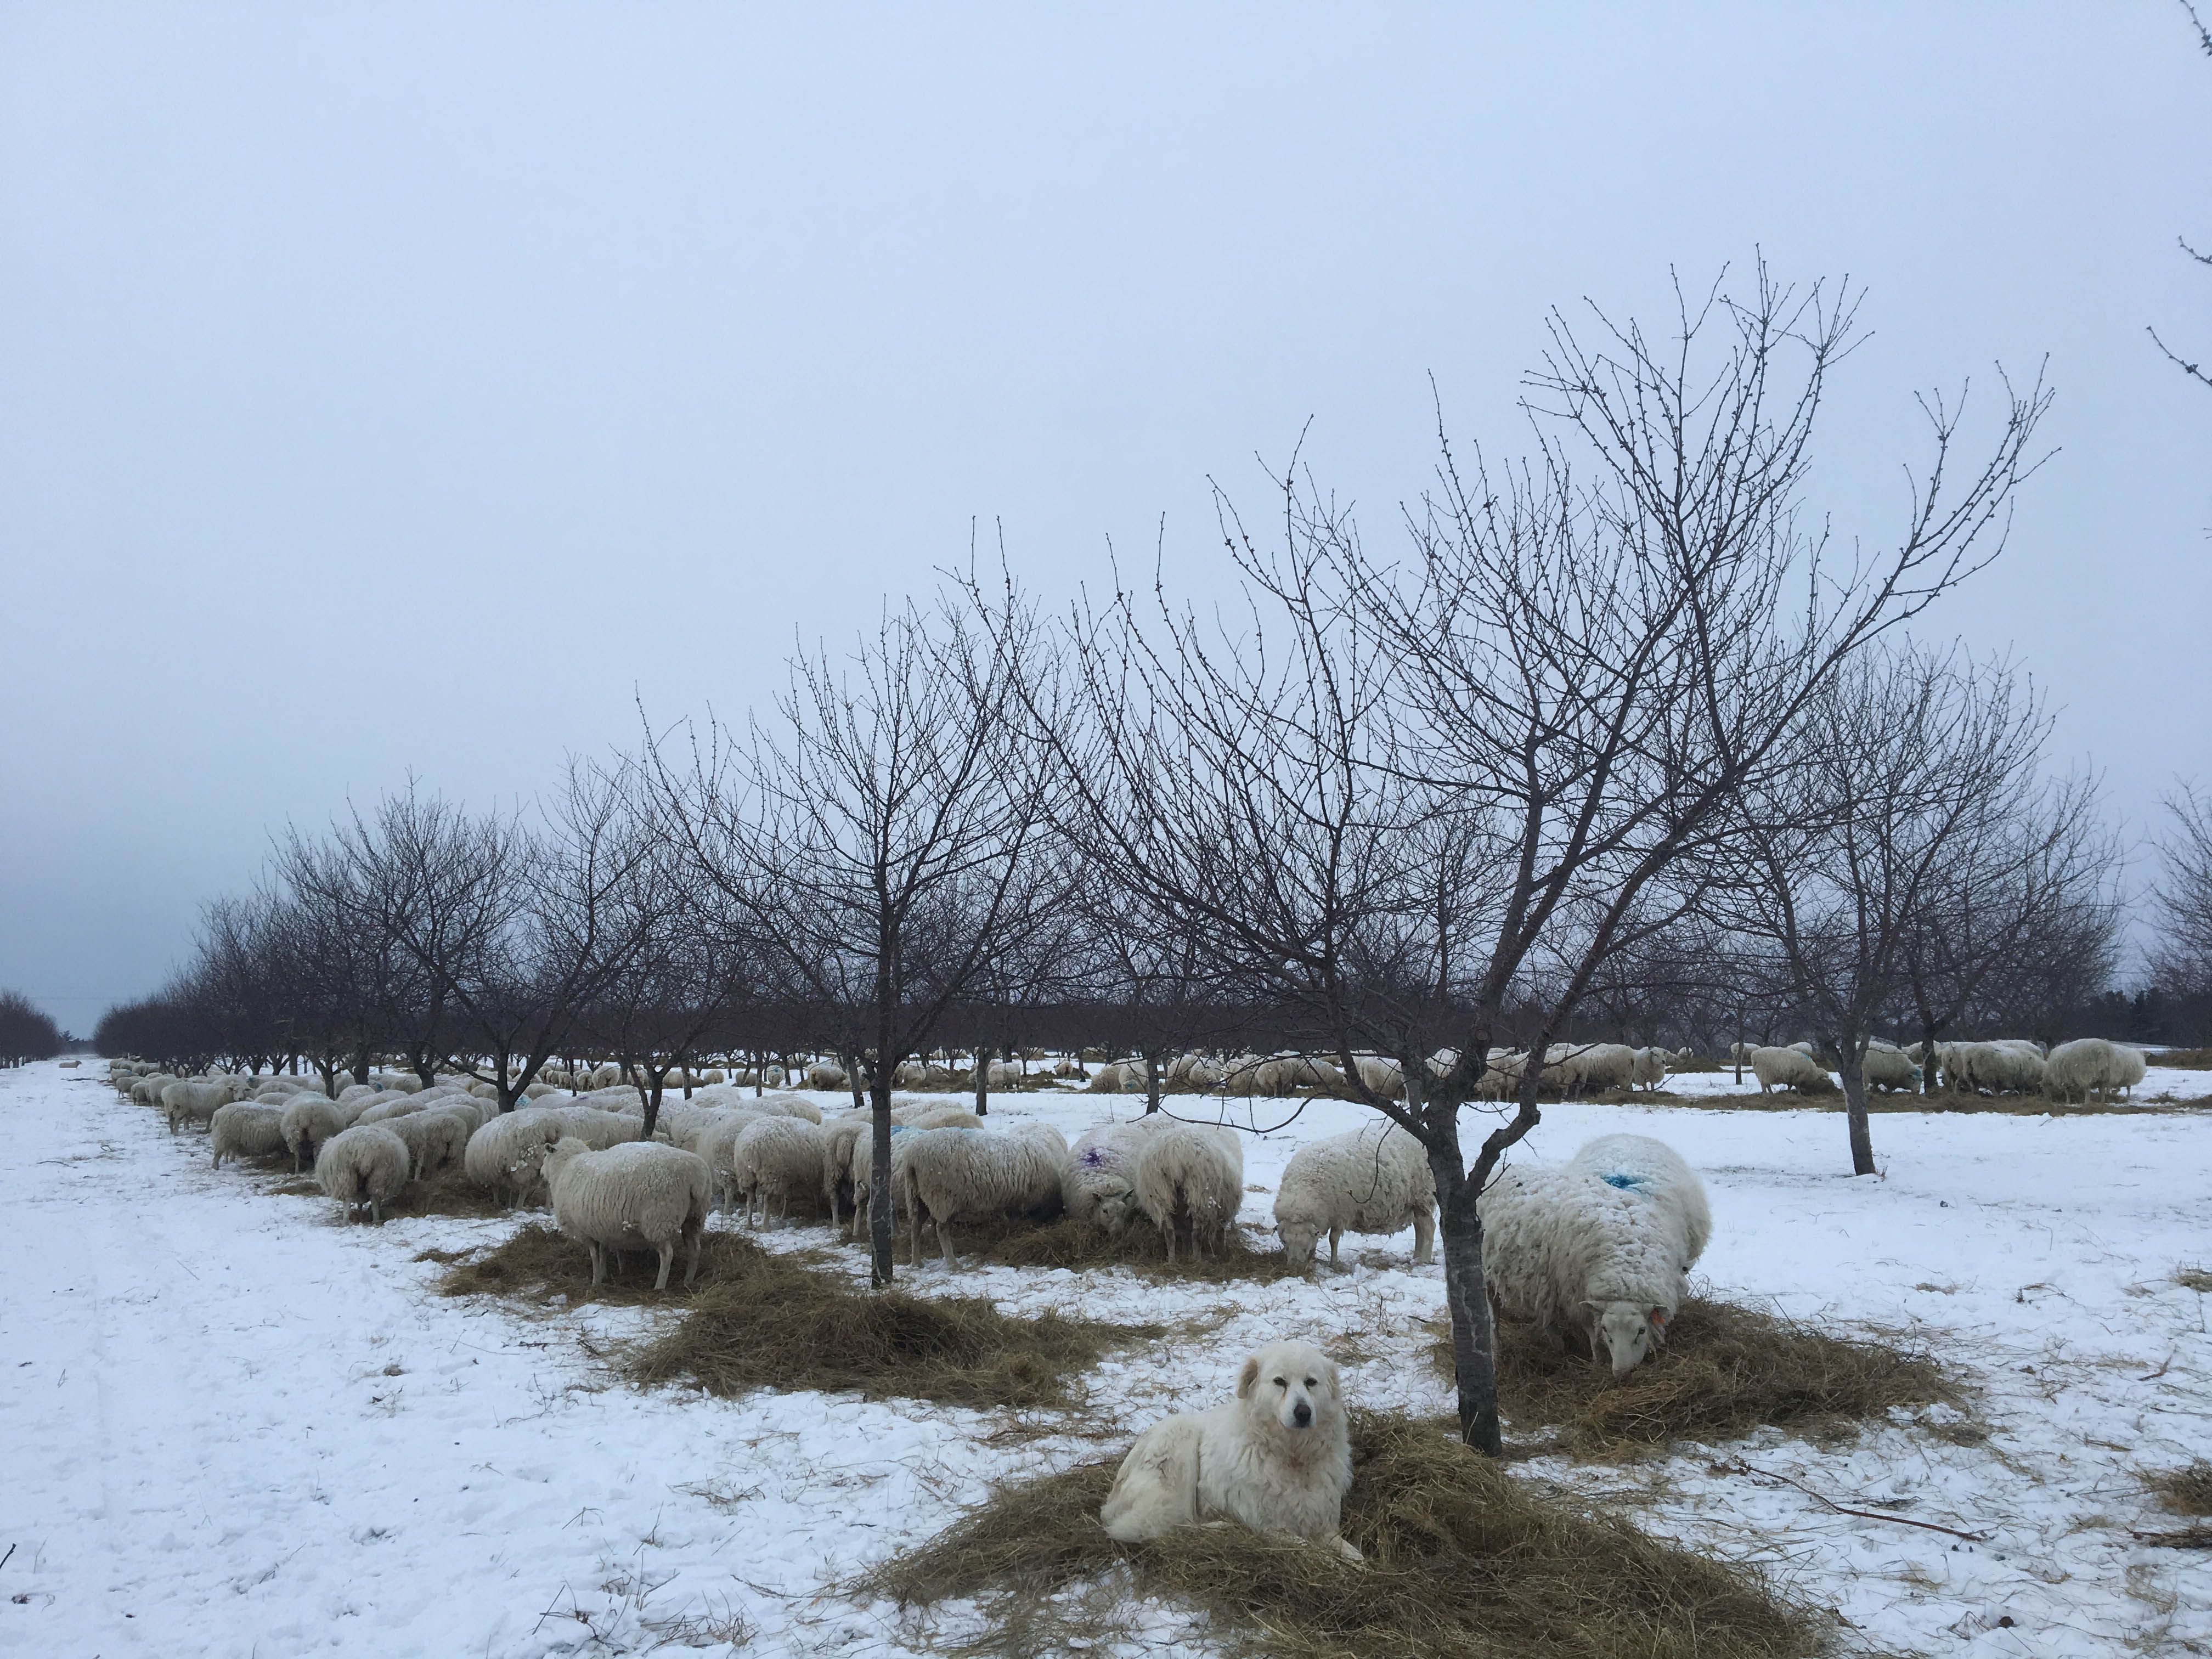 Flock of sheep eating hay outside in winter with livestock guardian lying nearby. Photo source: Ontario Sheep Farmers.